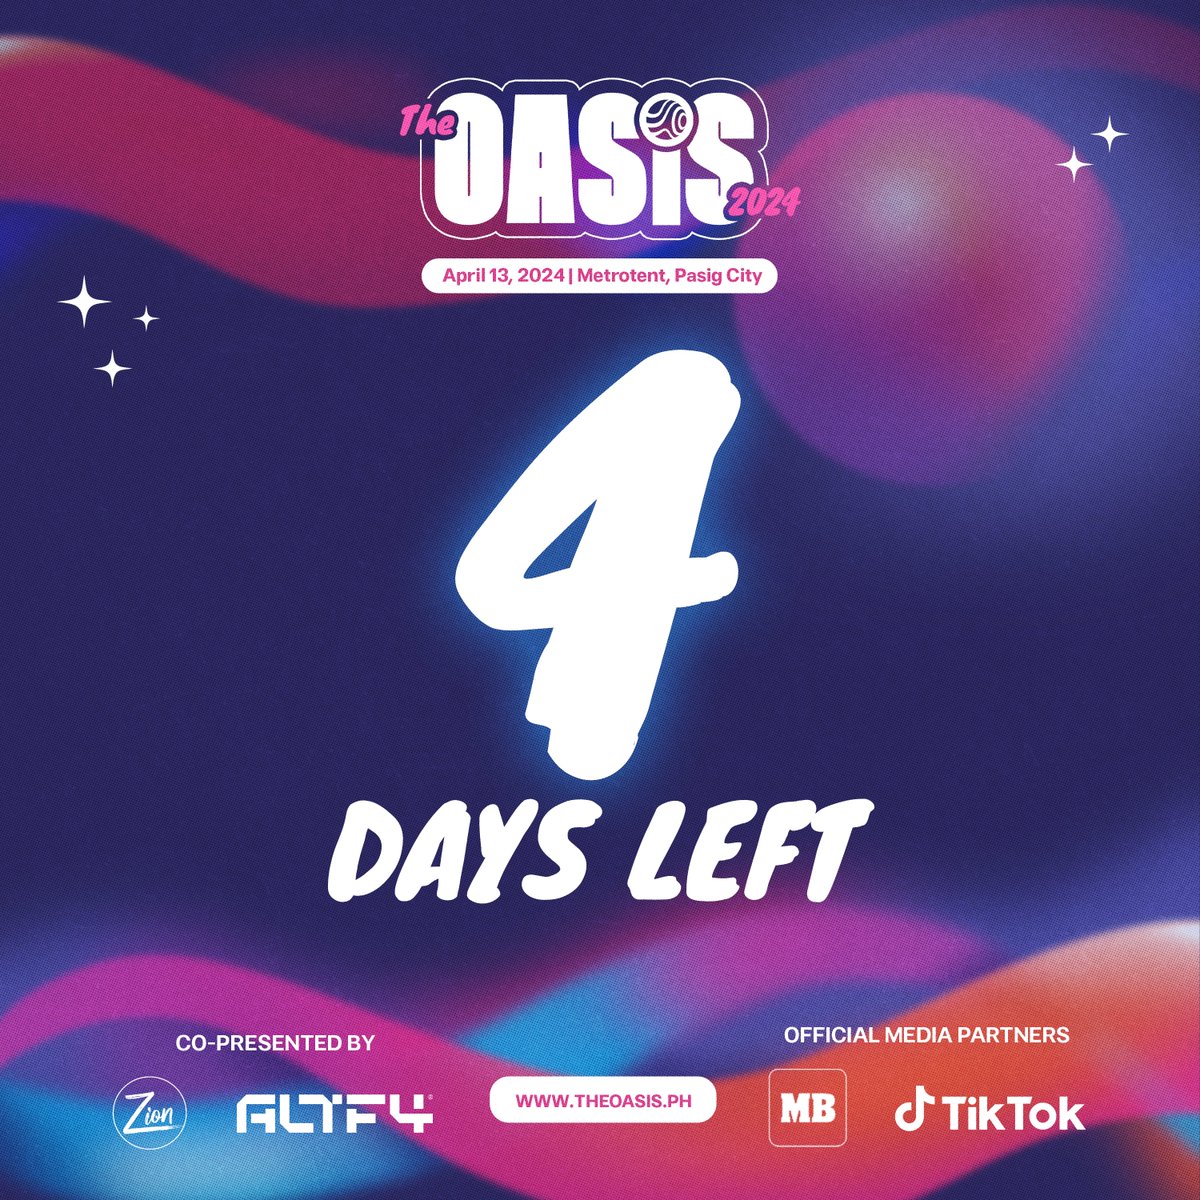 🛸 4 DAYS TO GO 🛸

T-Minus 4 days til' The OASIS arrives!

Tickets are almost SOLD OUT! Now is the perfect time to get your tickets.

Get your tickets here:
theoasis.ph

#TheOASIS2024 #SinceDayOne